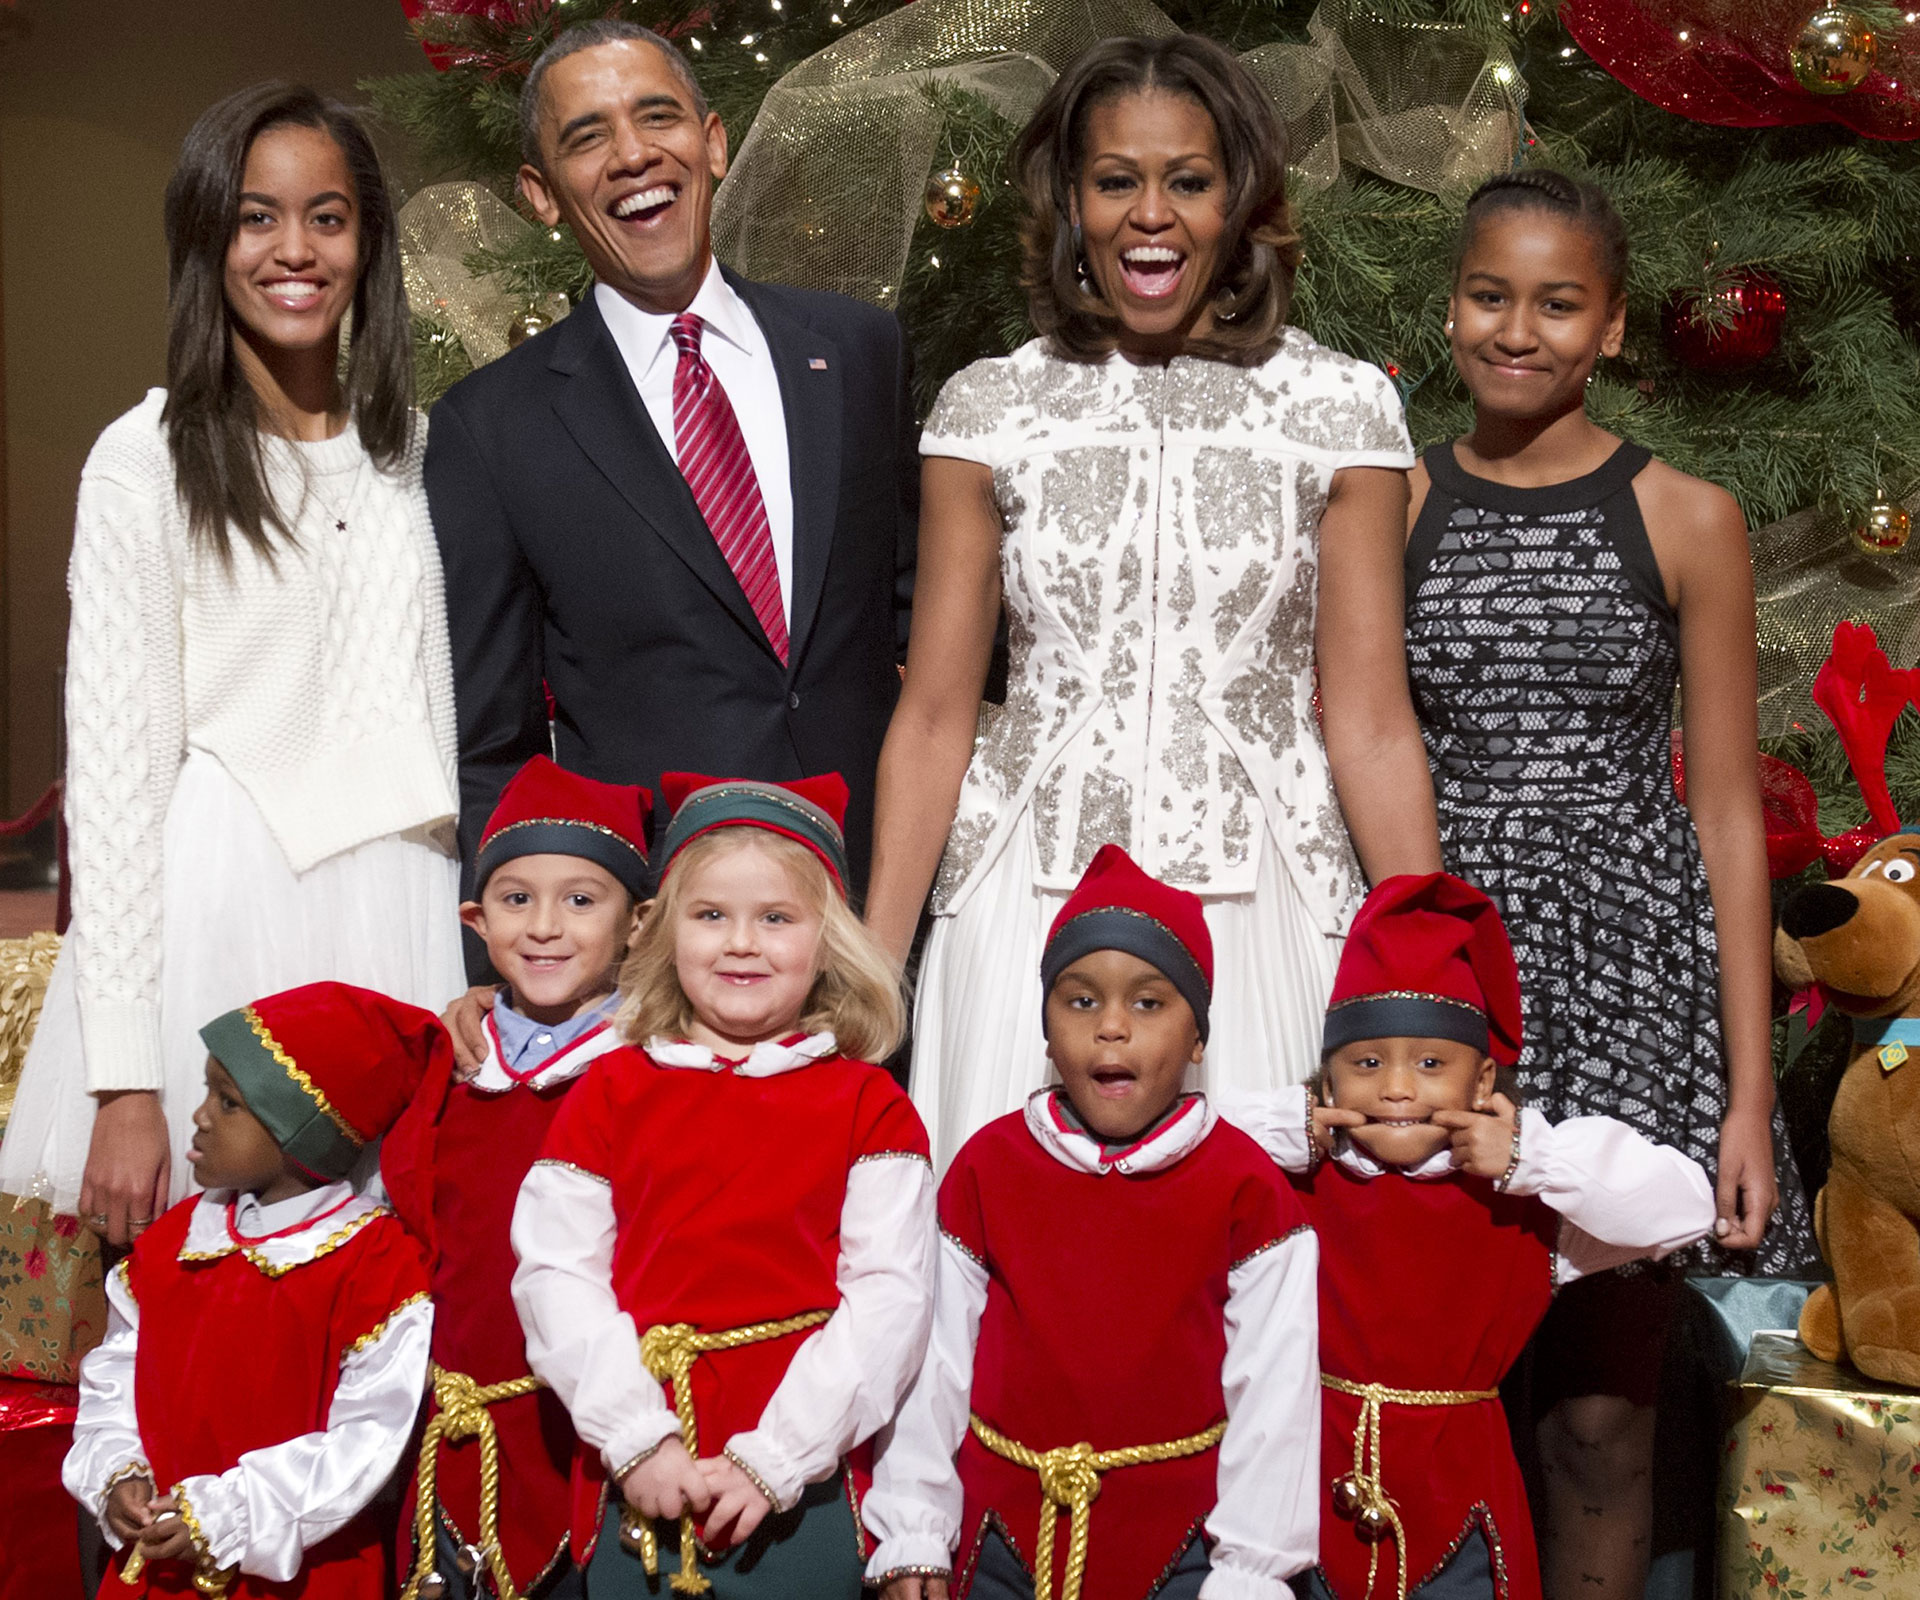 The Obamas’ amazing last Christmas in the White House